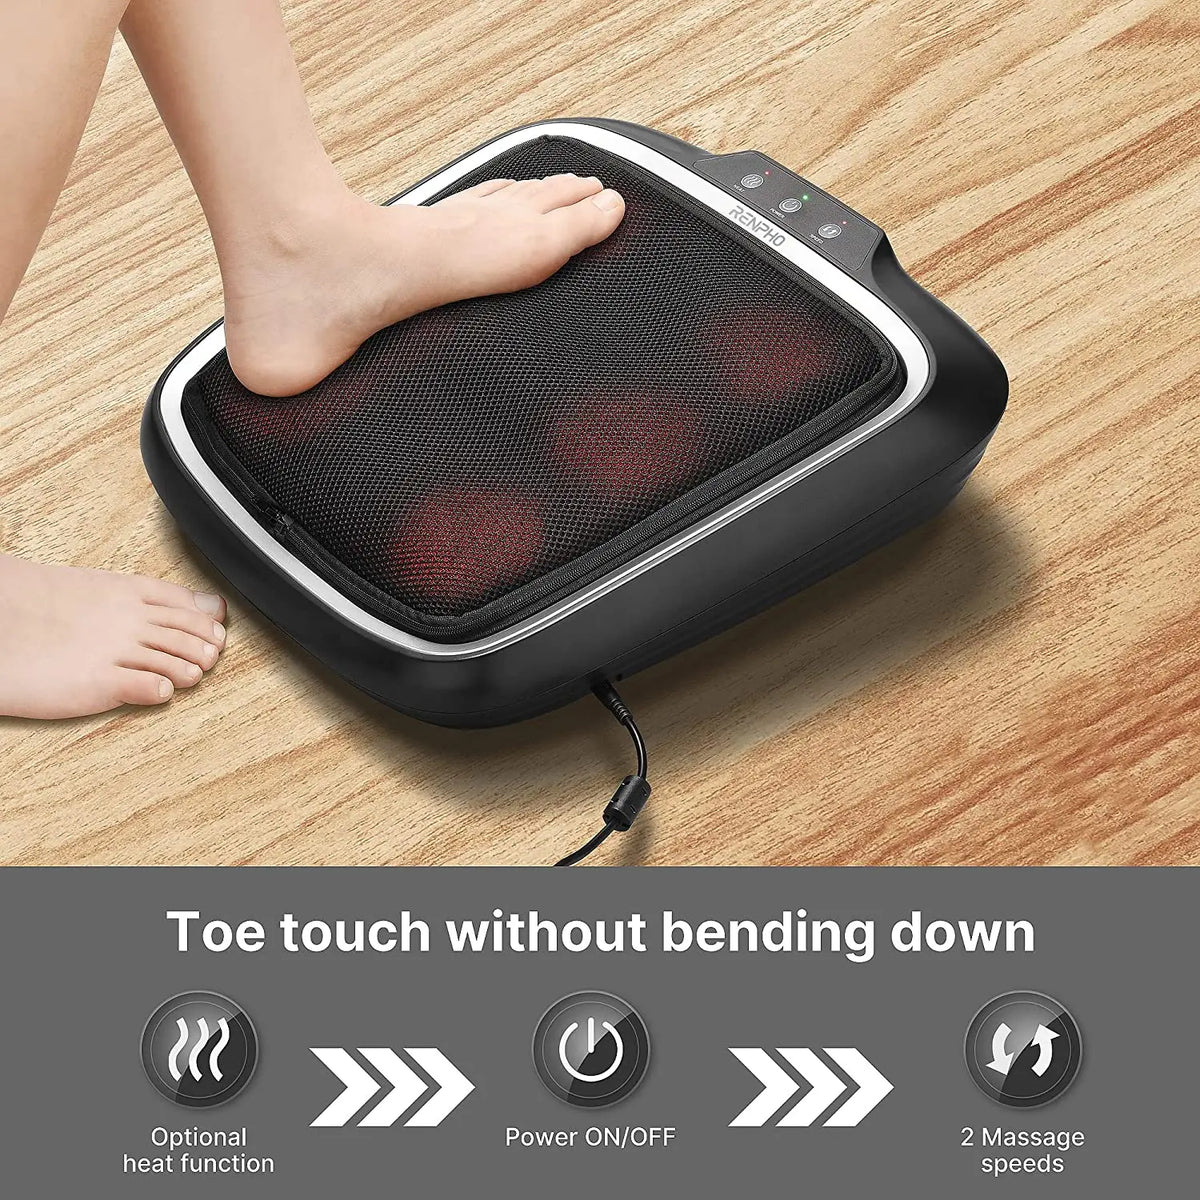 A person's foot rests on a black and red Renpho EU Foot Massager Pad placed on a wooden floor. Text on the image states "Toe touch without bending down" and highlights features like an optional heat therapy function, power on/off button, and two deep kneading massage speeds.